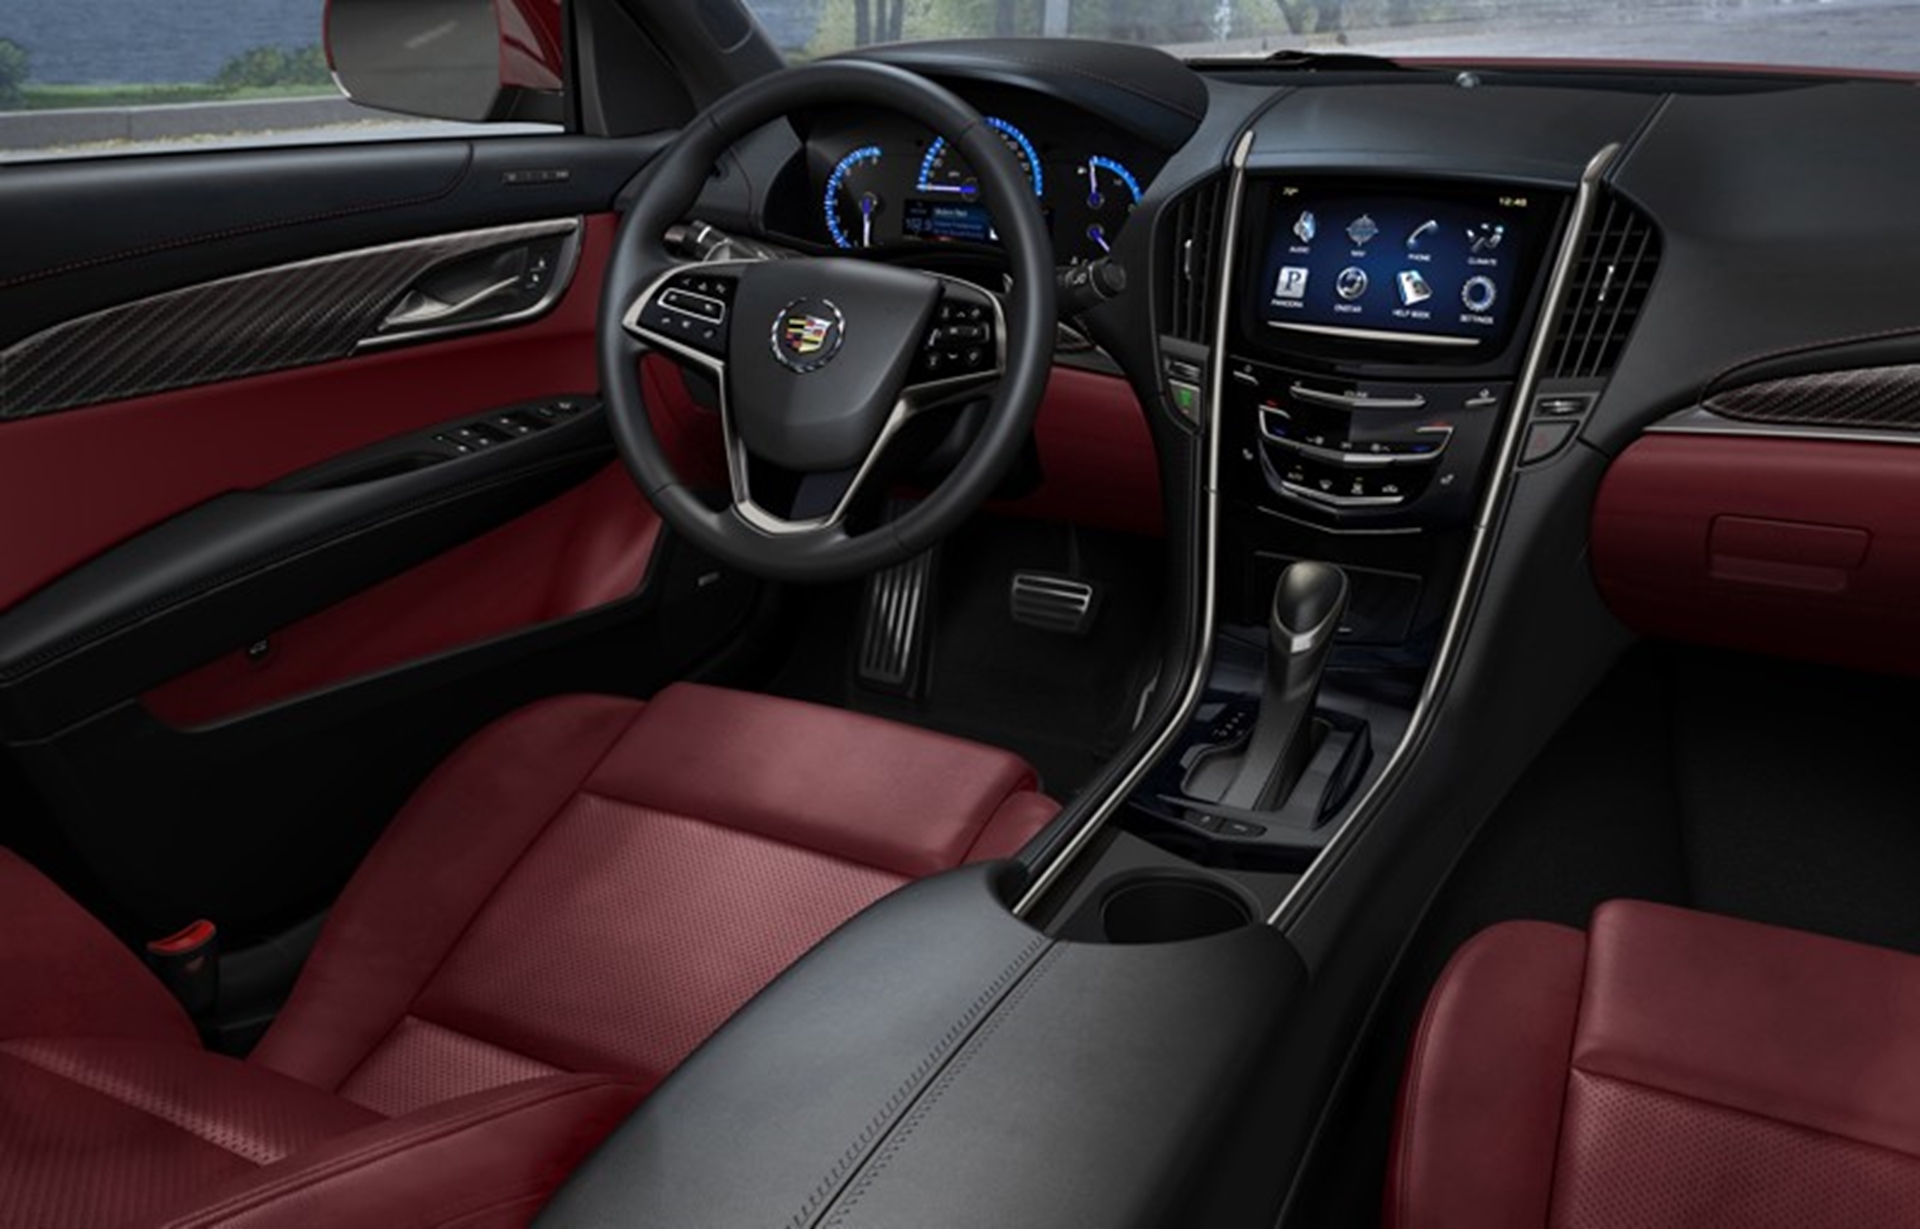 2013 Cadillac ATS Challenges the Status Quo